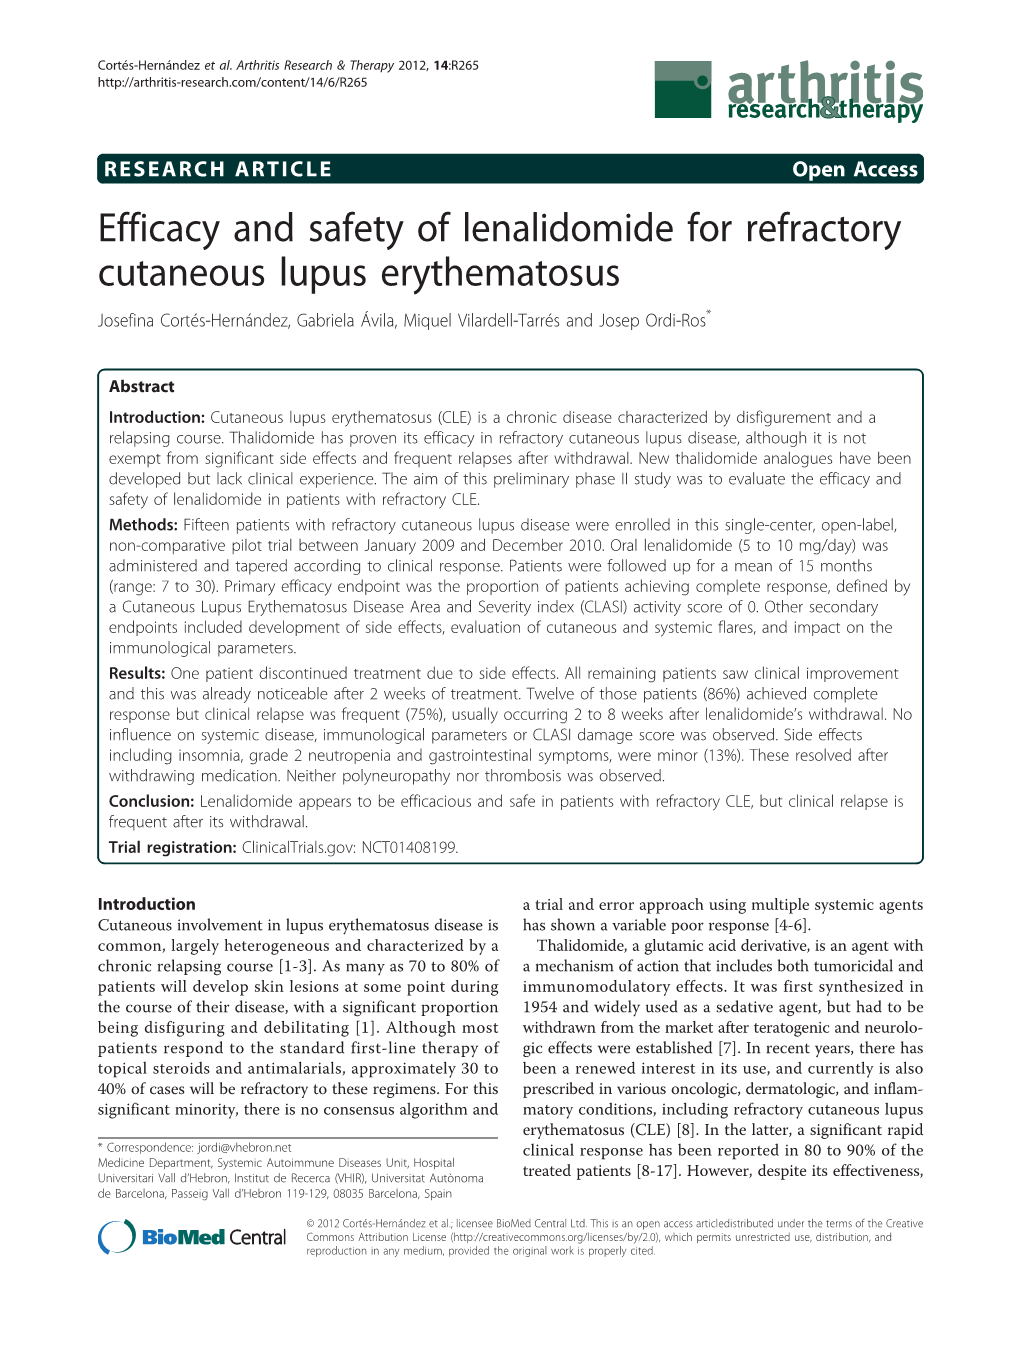 Efficacy and Safety of Lenalidomide for Refractory Cutaneous Lupus